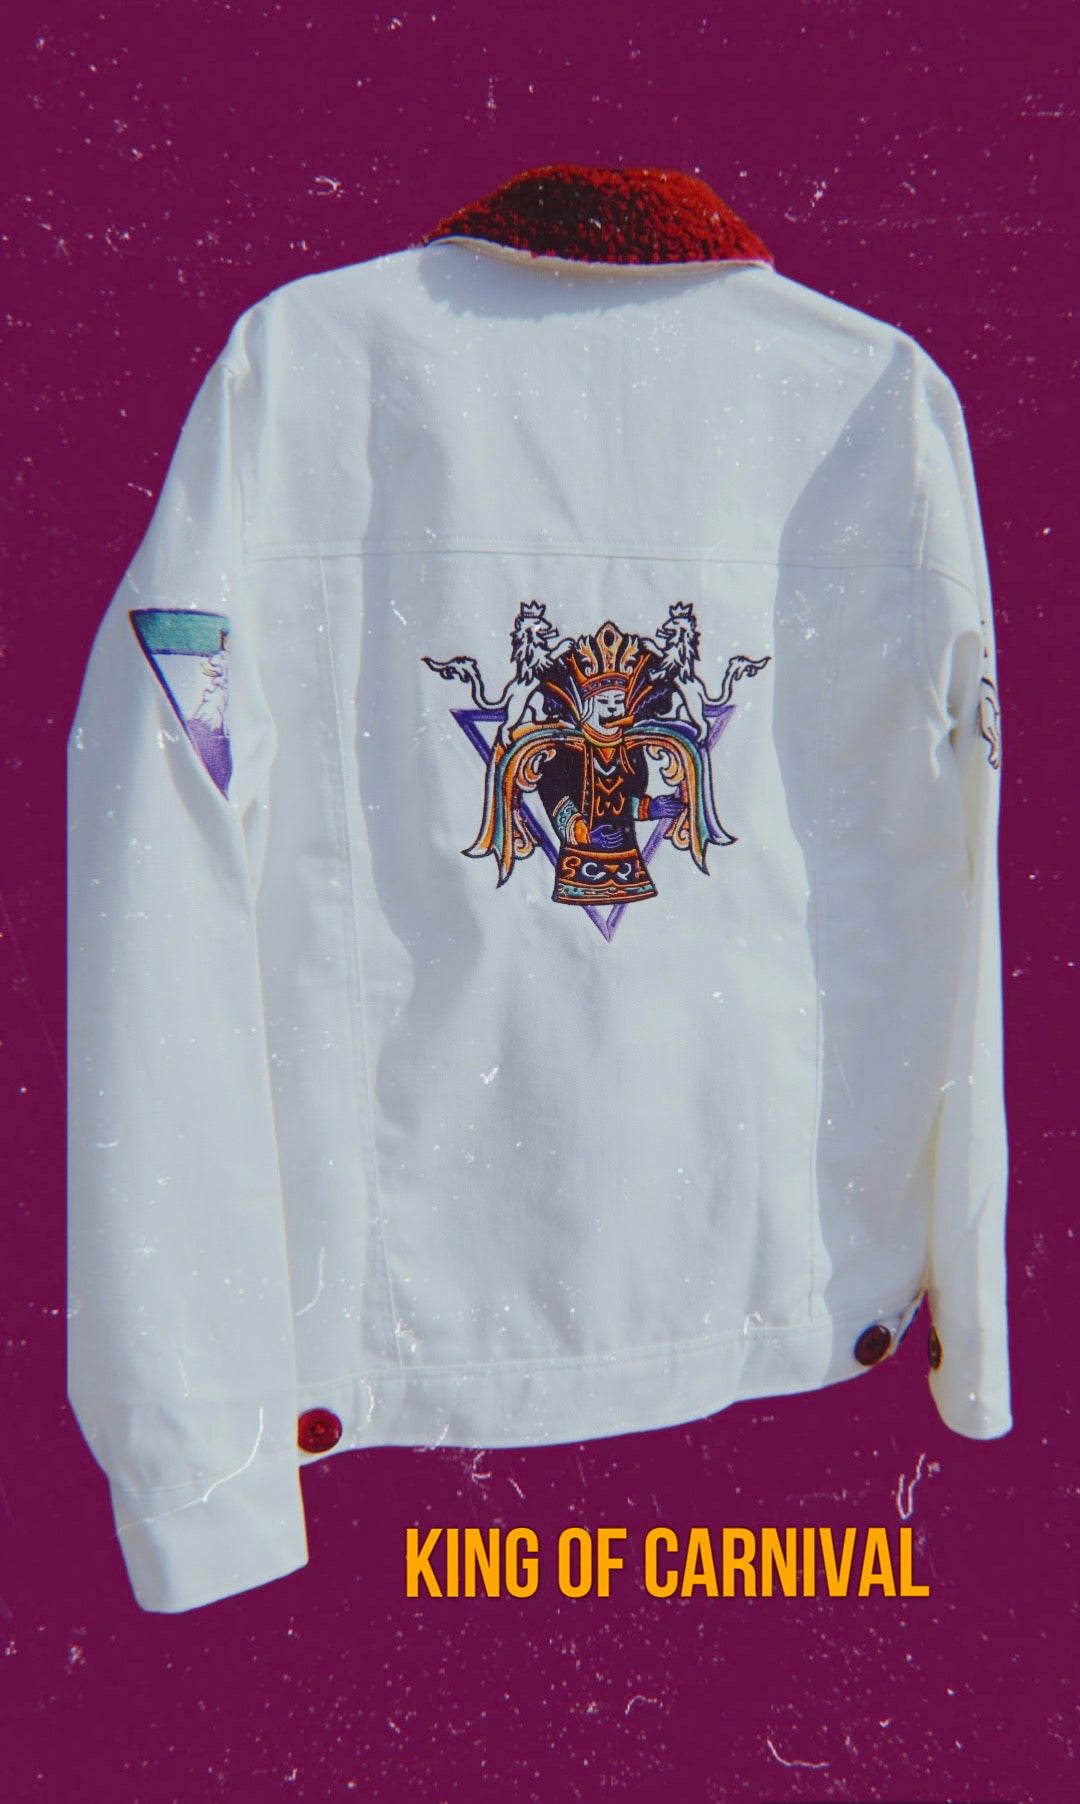 Marketing advertisement showcasing the Royalty10 Mardi Gras 24 King of Carnival Jean Jacket. This exquisite jacket features intricate embroidery, opulent purple fur collar, and stylish white denim fabric.